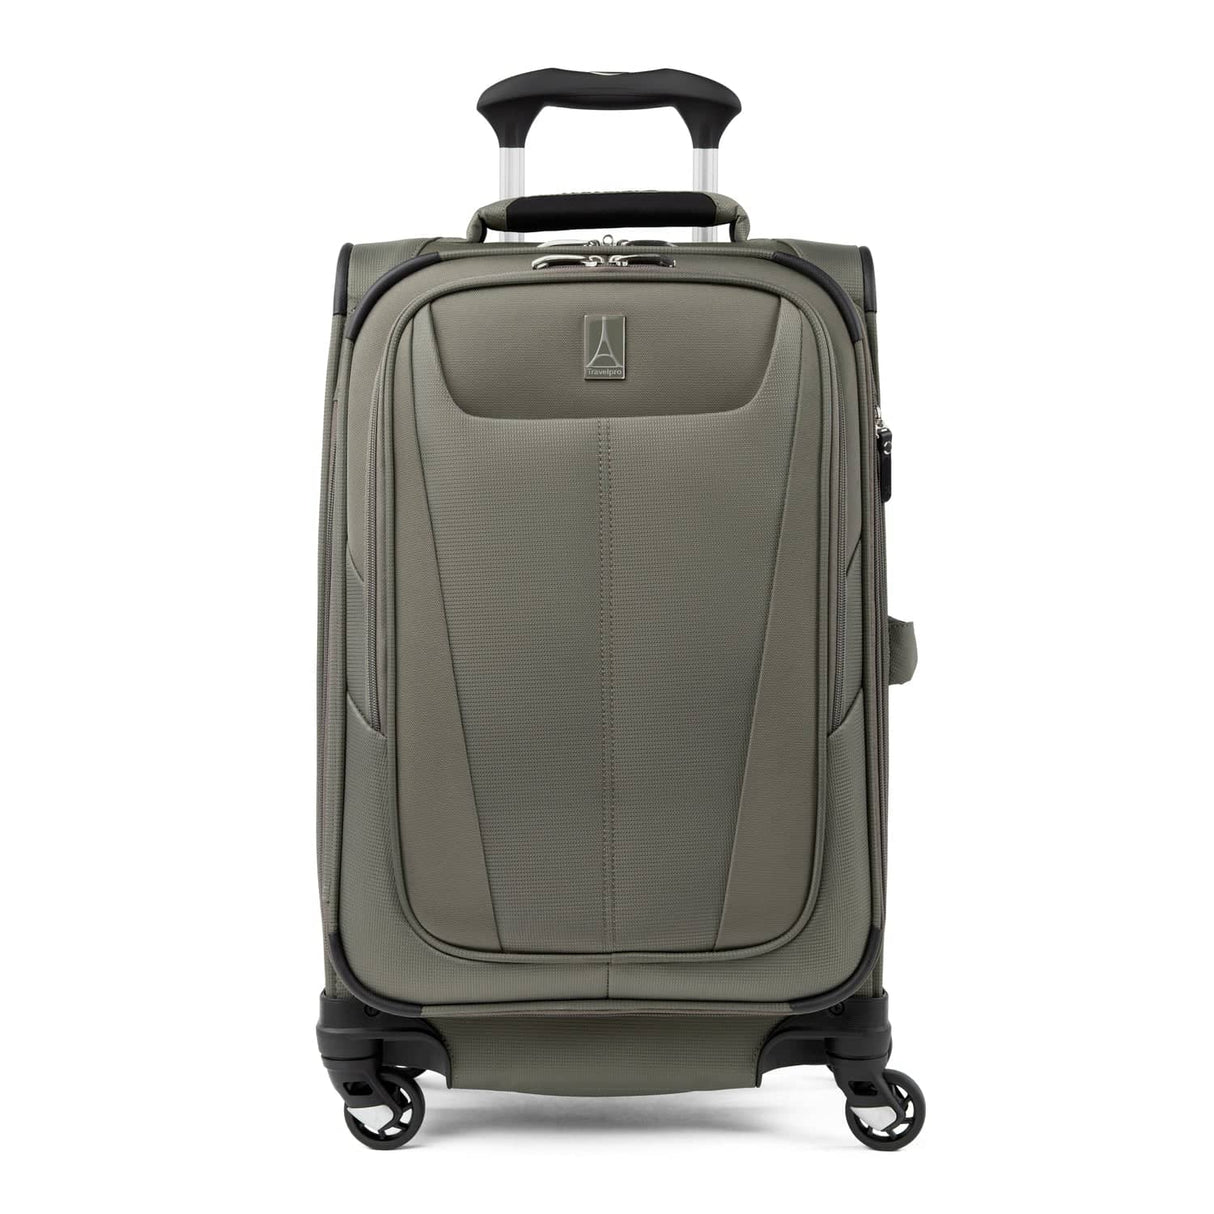 Travelpro Maxlite 5 21" Carry-On Expandable Spinner , , 401176106_-1500x1500-f3a2c67_1024x1024_2x_14c2a4f3-001a-4192-b77f-b379ced2d252